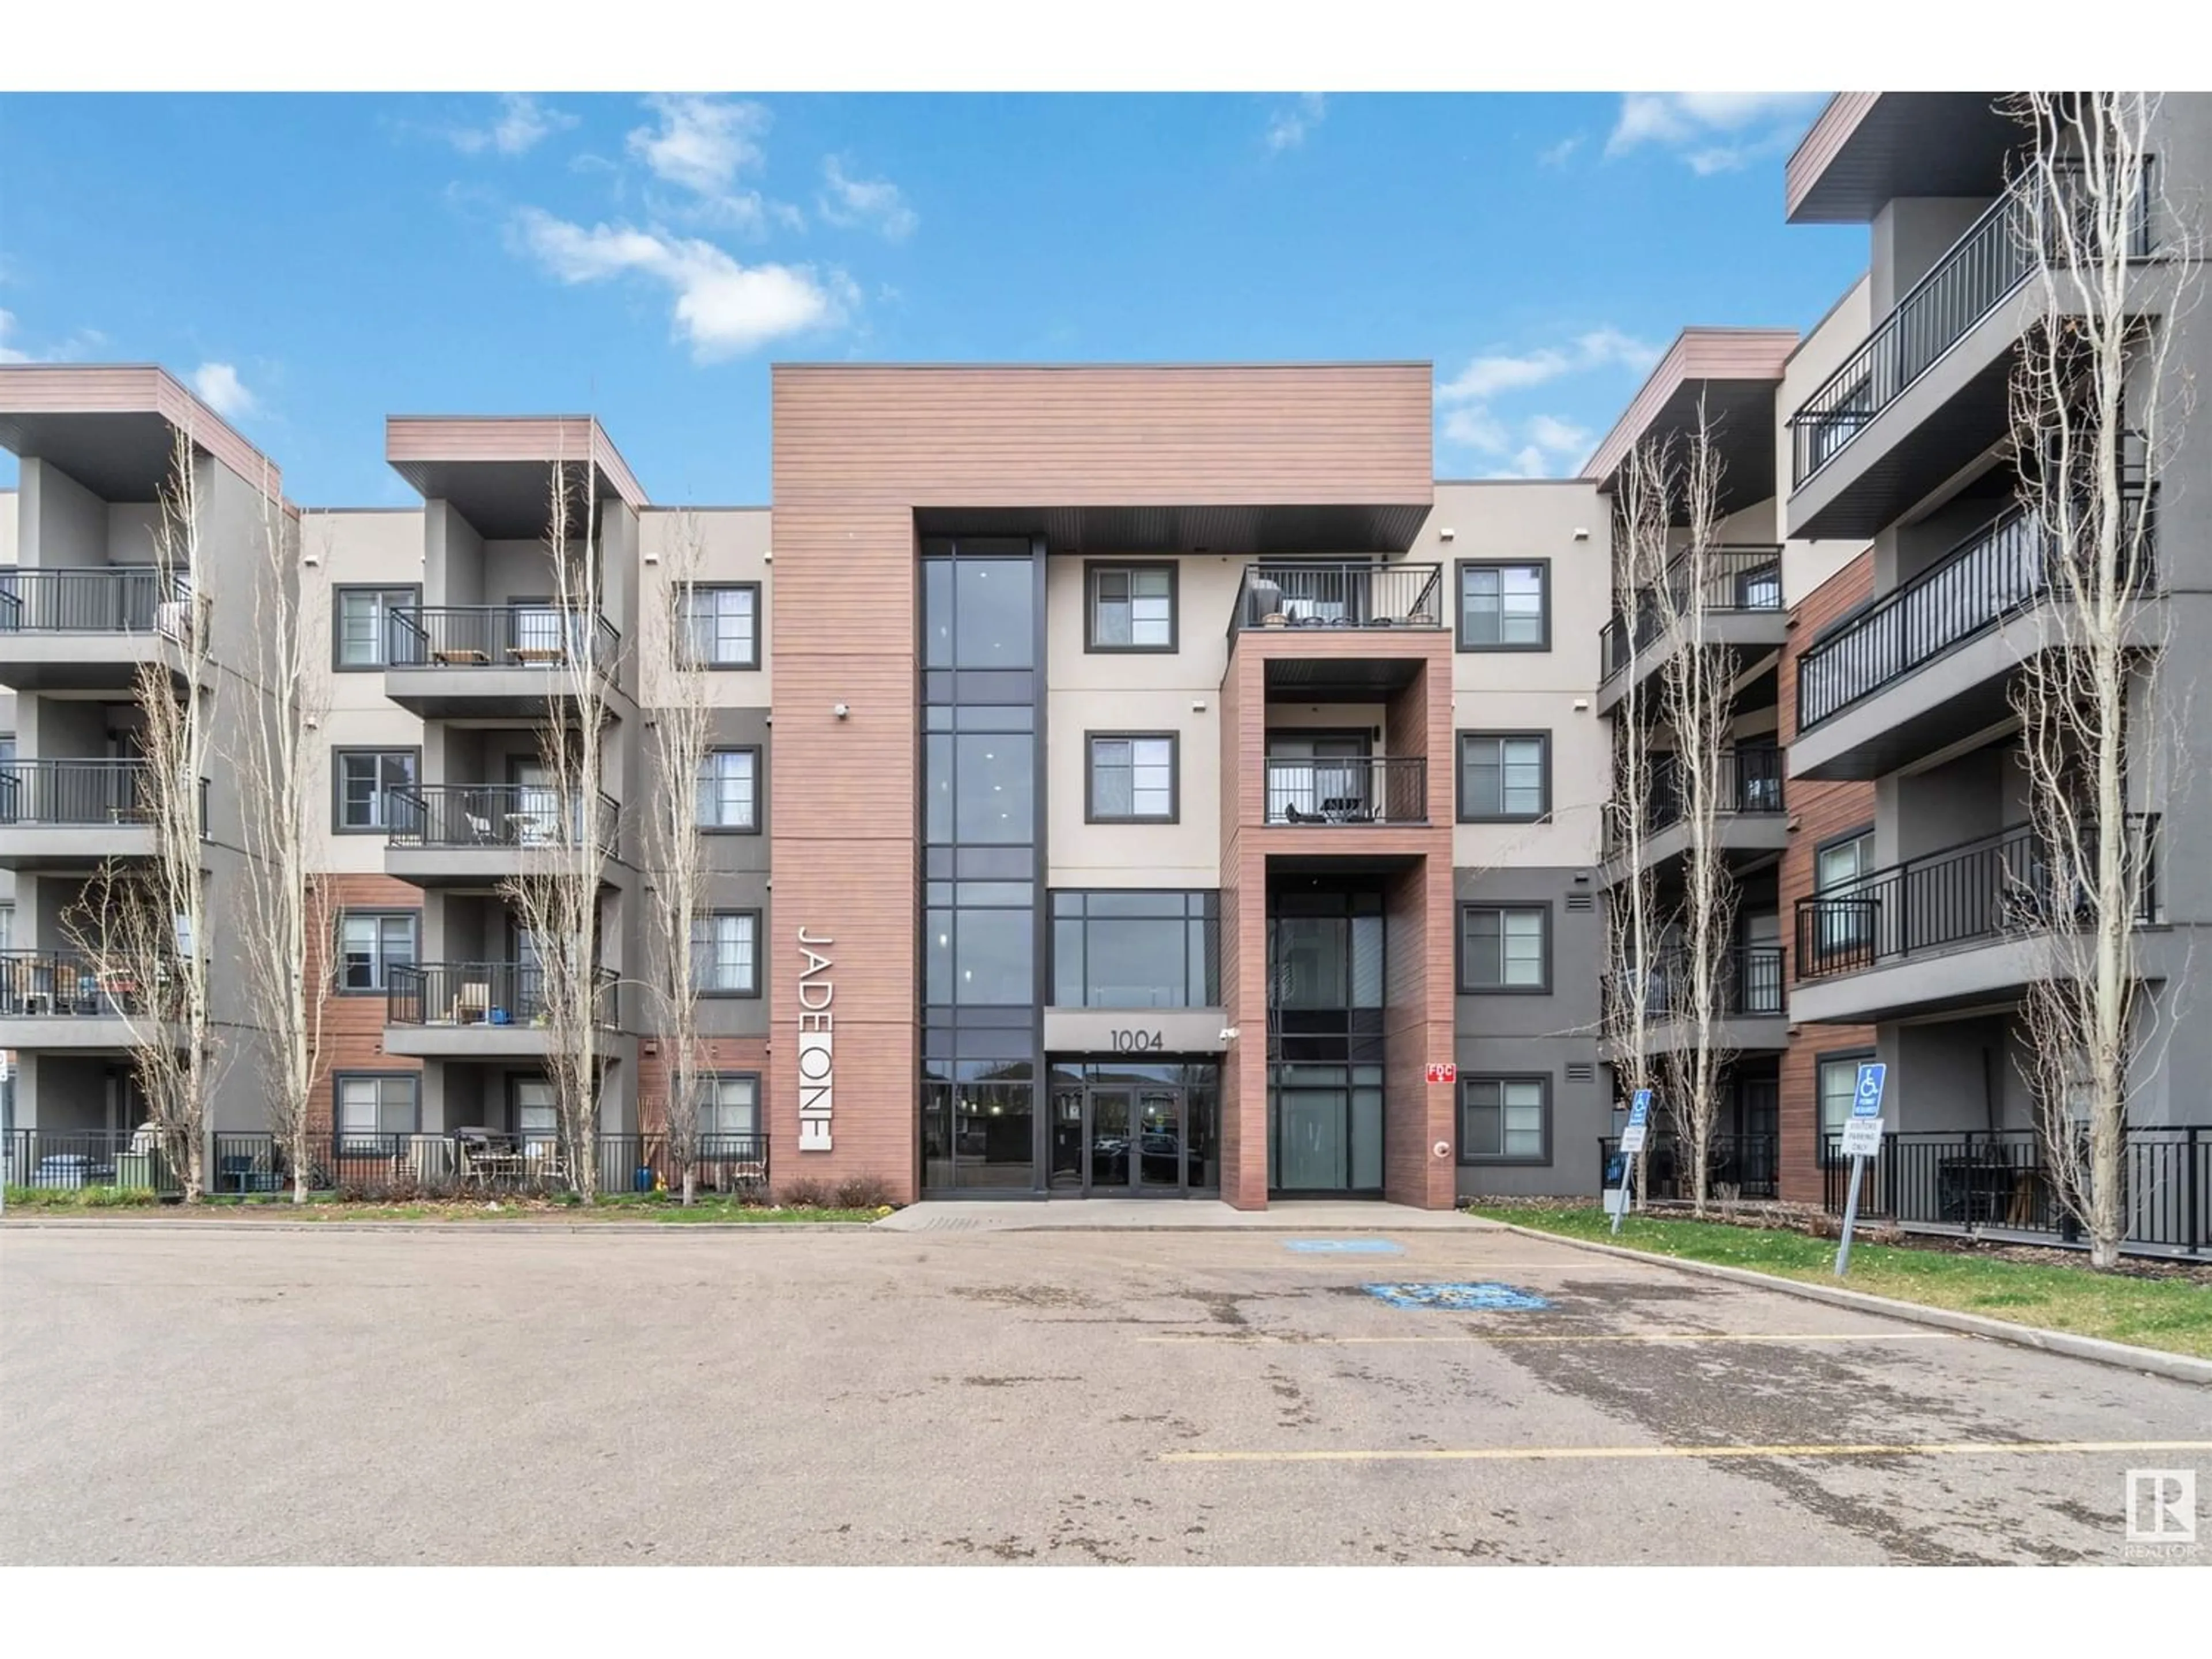 A pic from exterior of the house or condo for #418 1004 Rosenthal BV NW, Edmonton Alberta T5T7C6